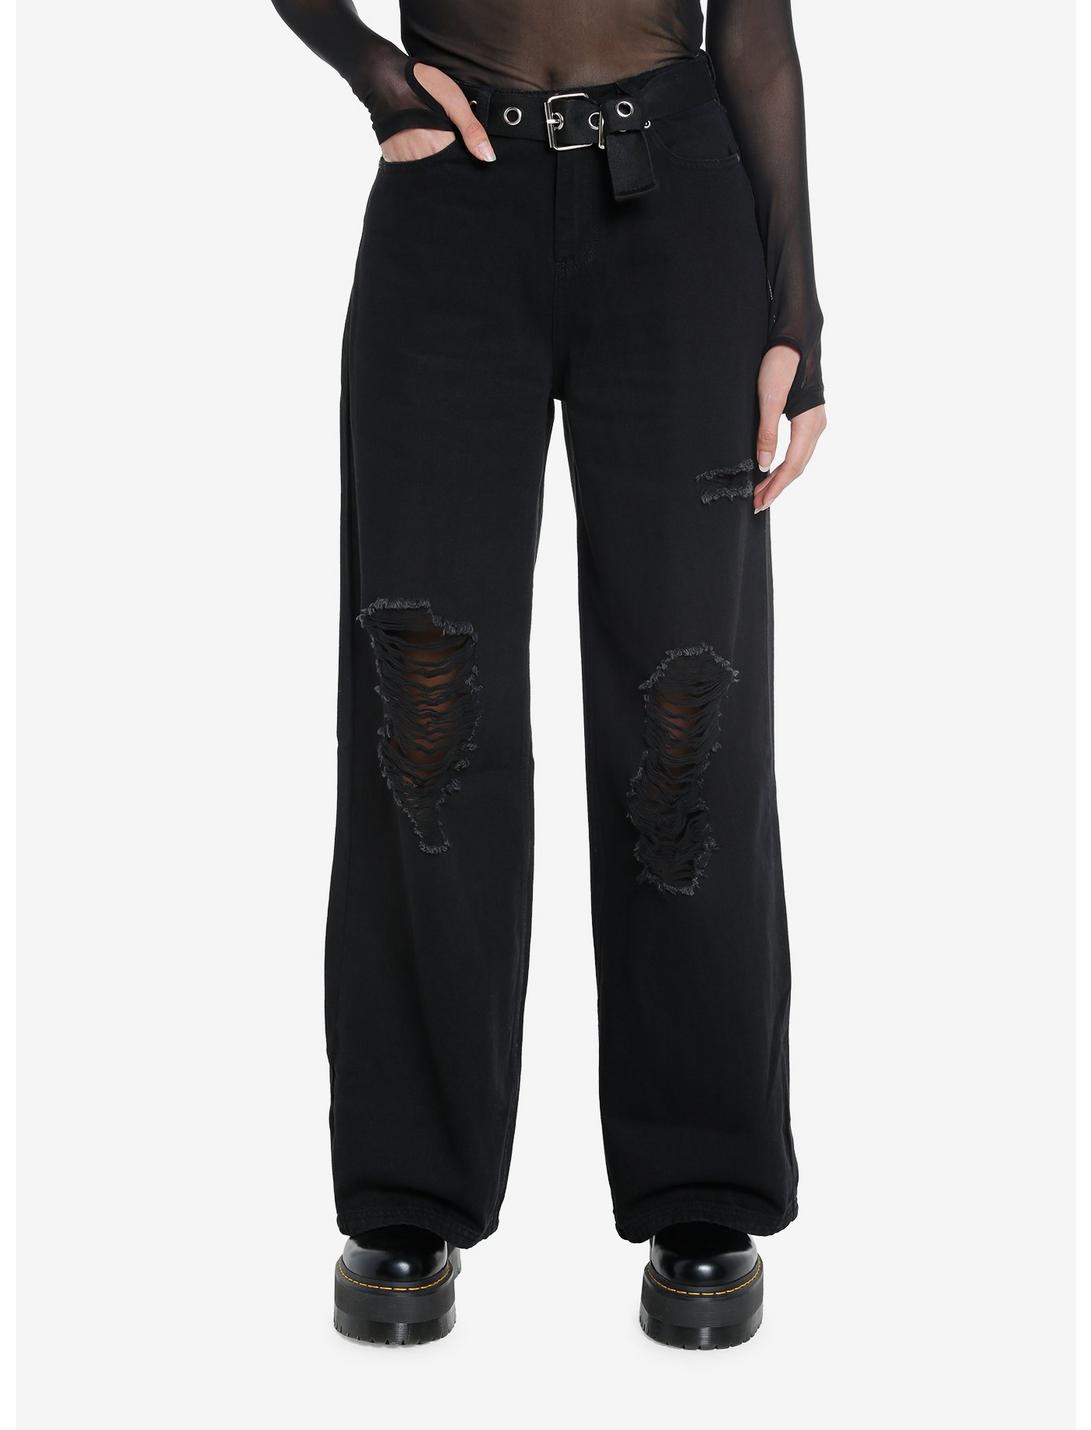 Black Distressed Straight Leg Pants With Belt | Hot Topic